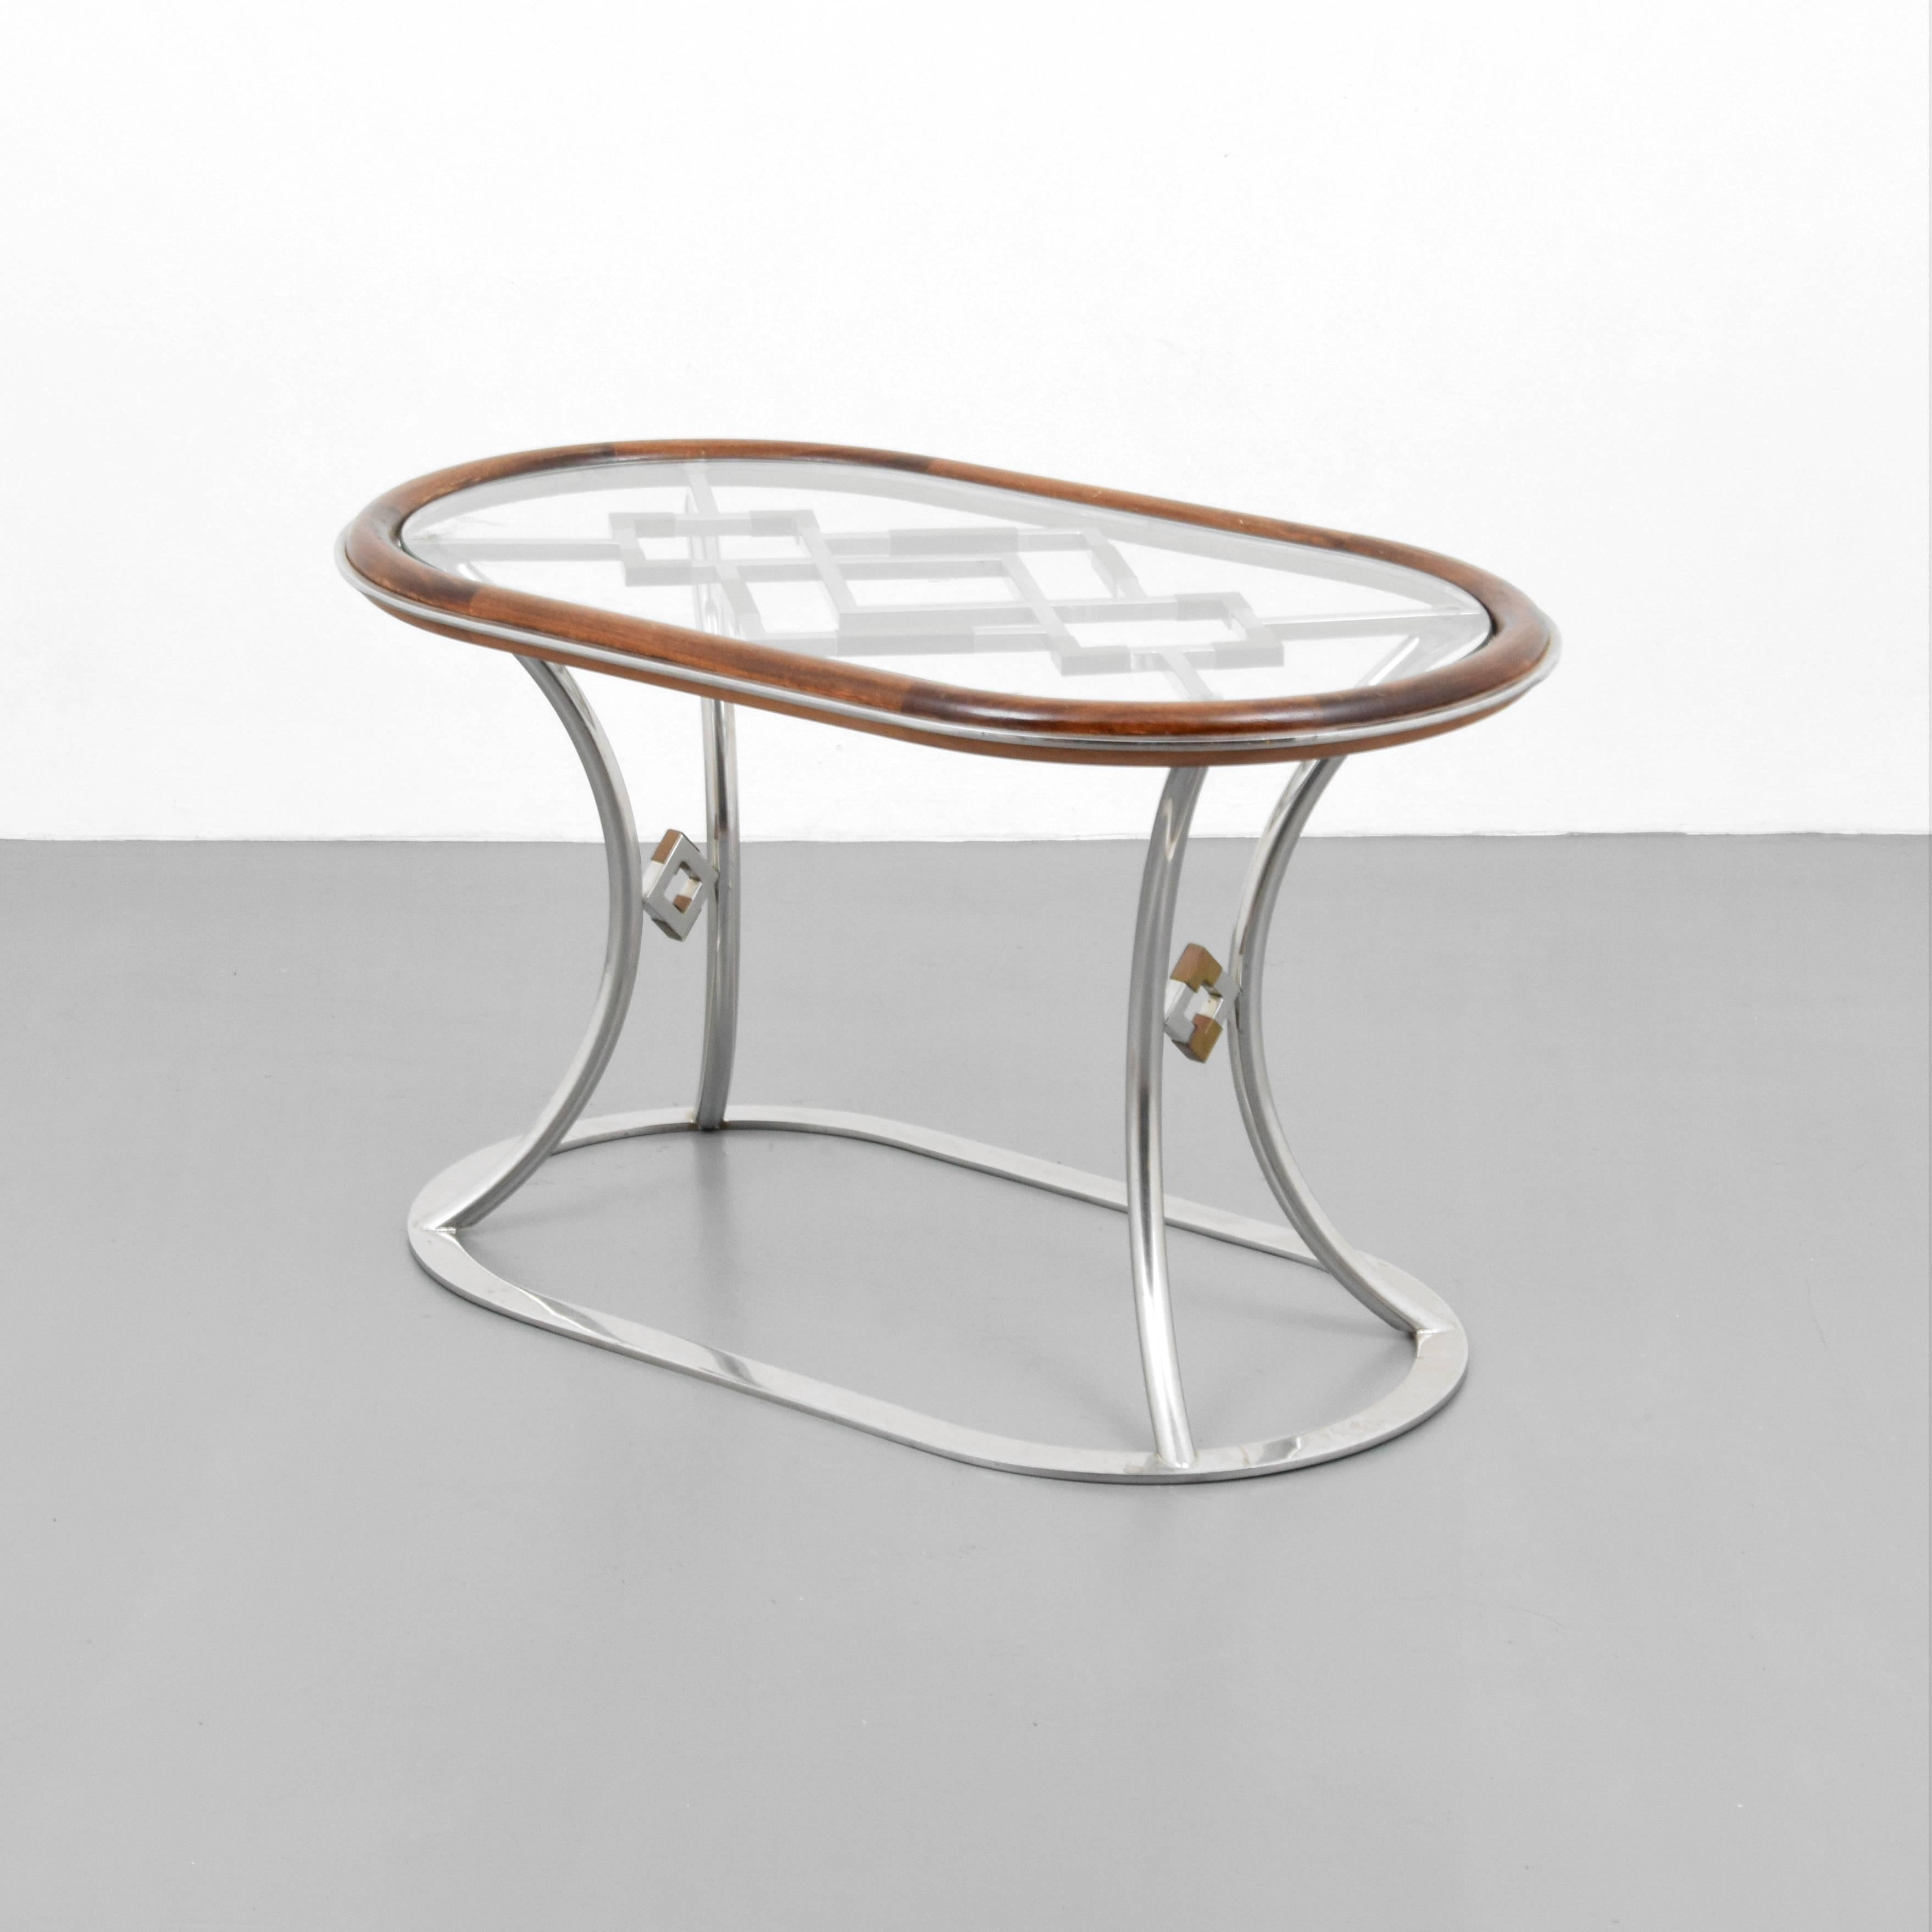 Stylish pair of steel and brass side tables by Alain Delon for Maison Jansen.